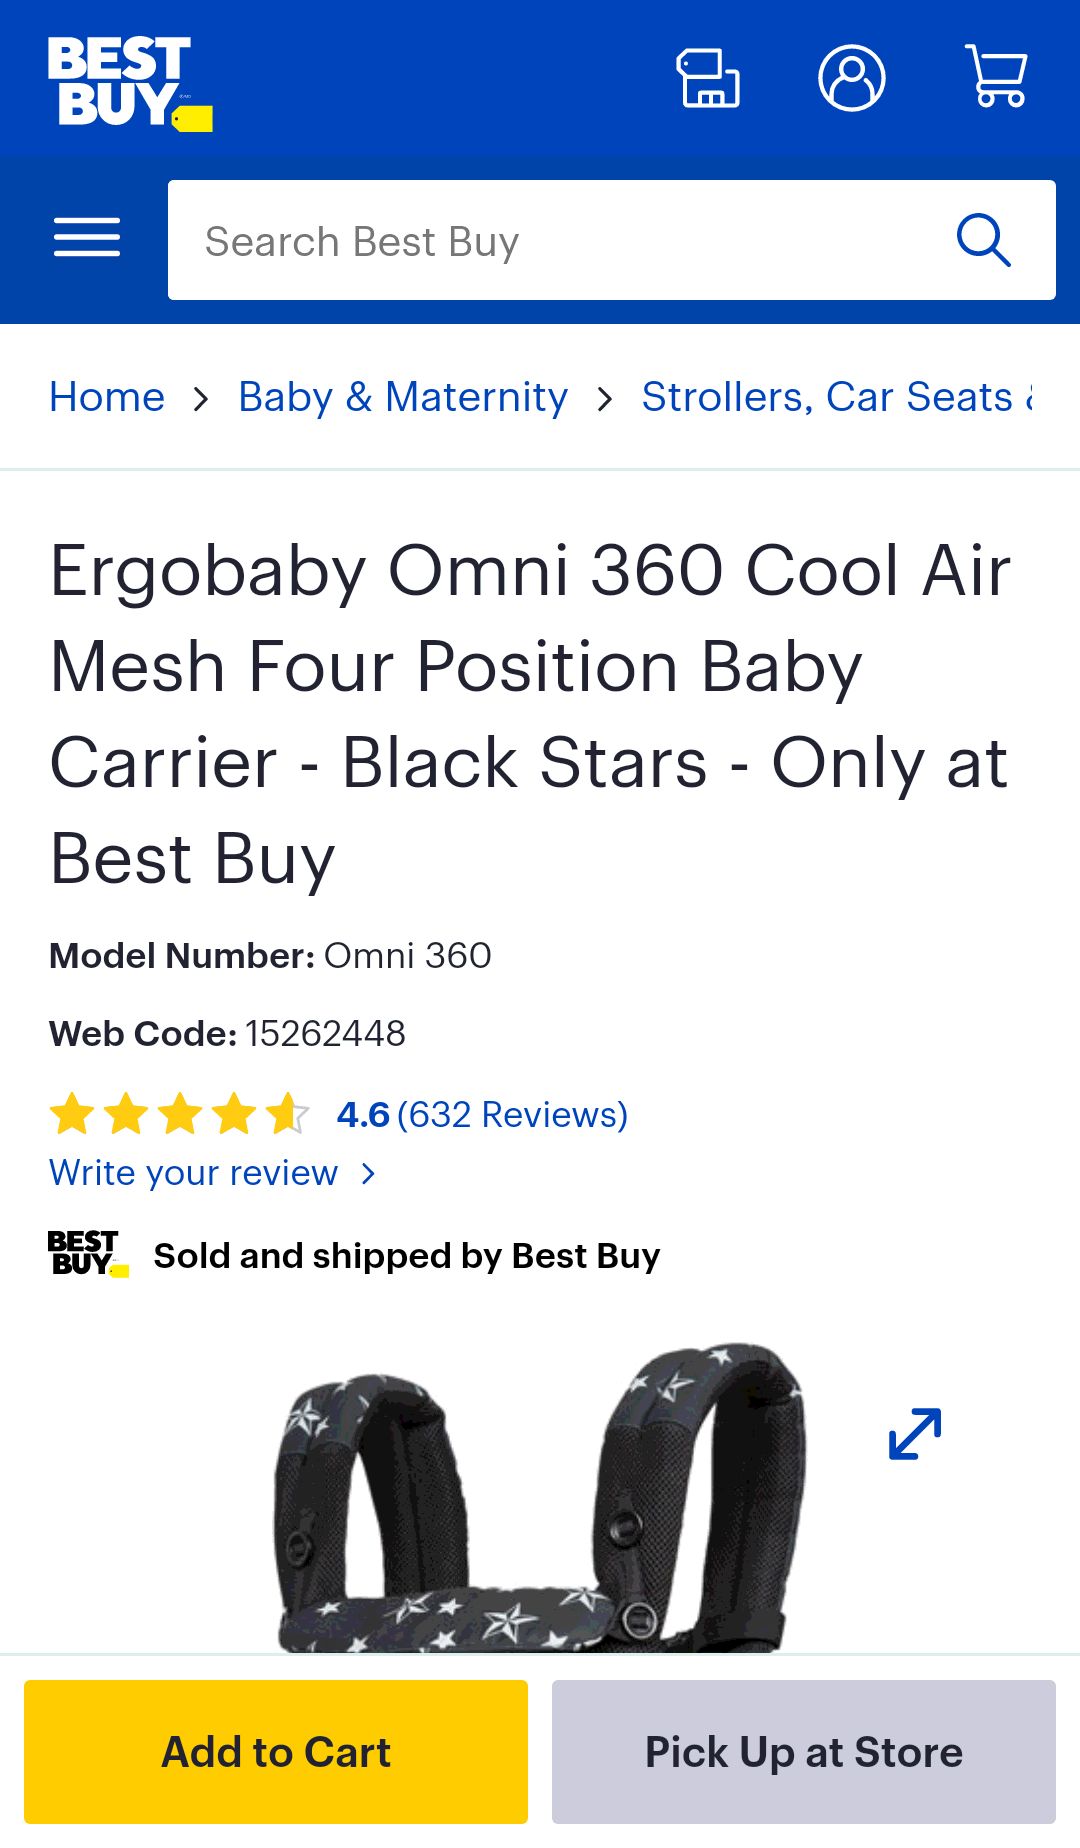 Ergobaby Omni 360 Cool Air Mesh Four Position Baby Carrier - Black Stars - Only at Best Buy | Best Buy Canada